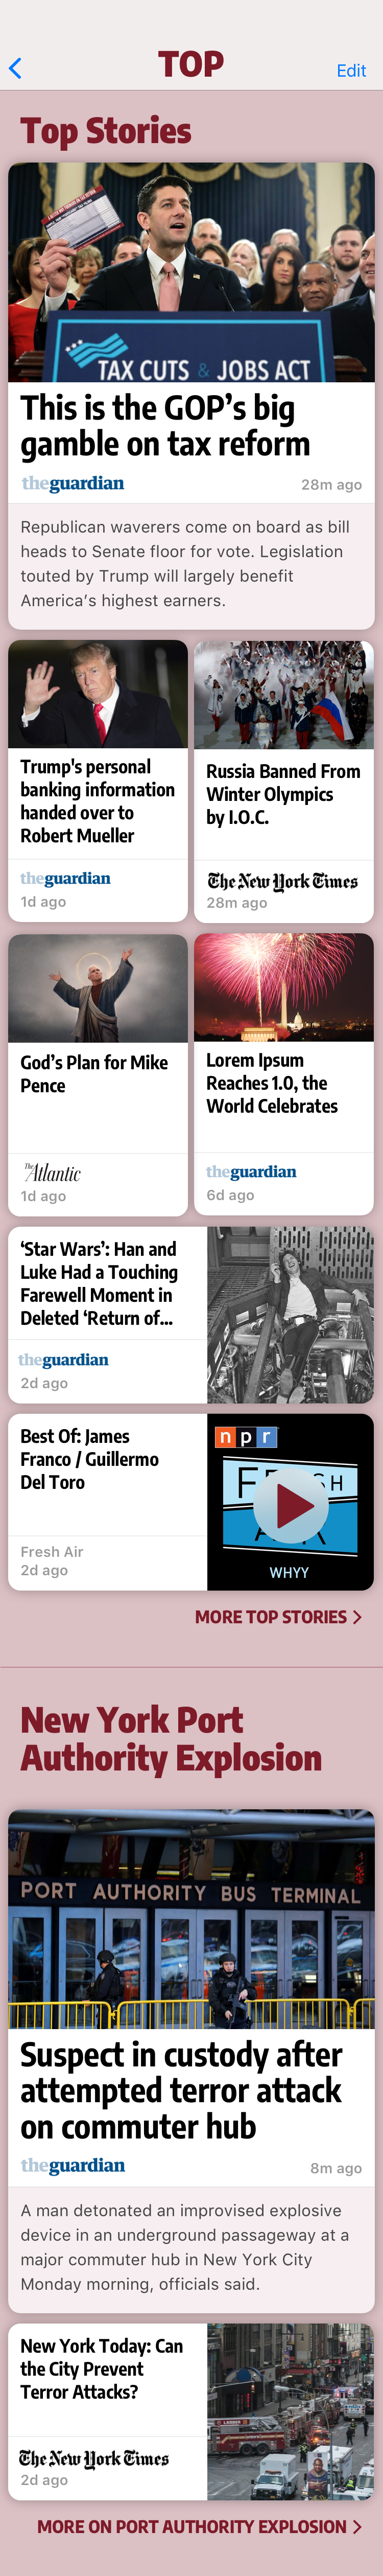 Screenshot: A page of top news